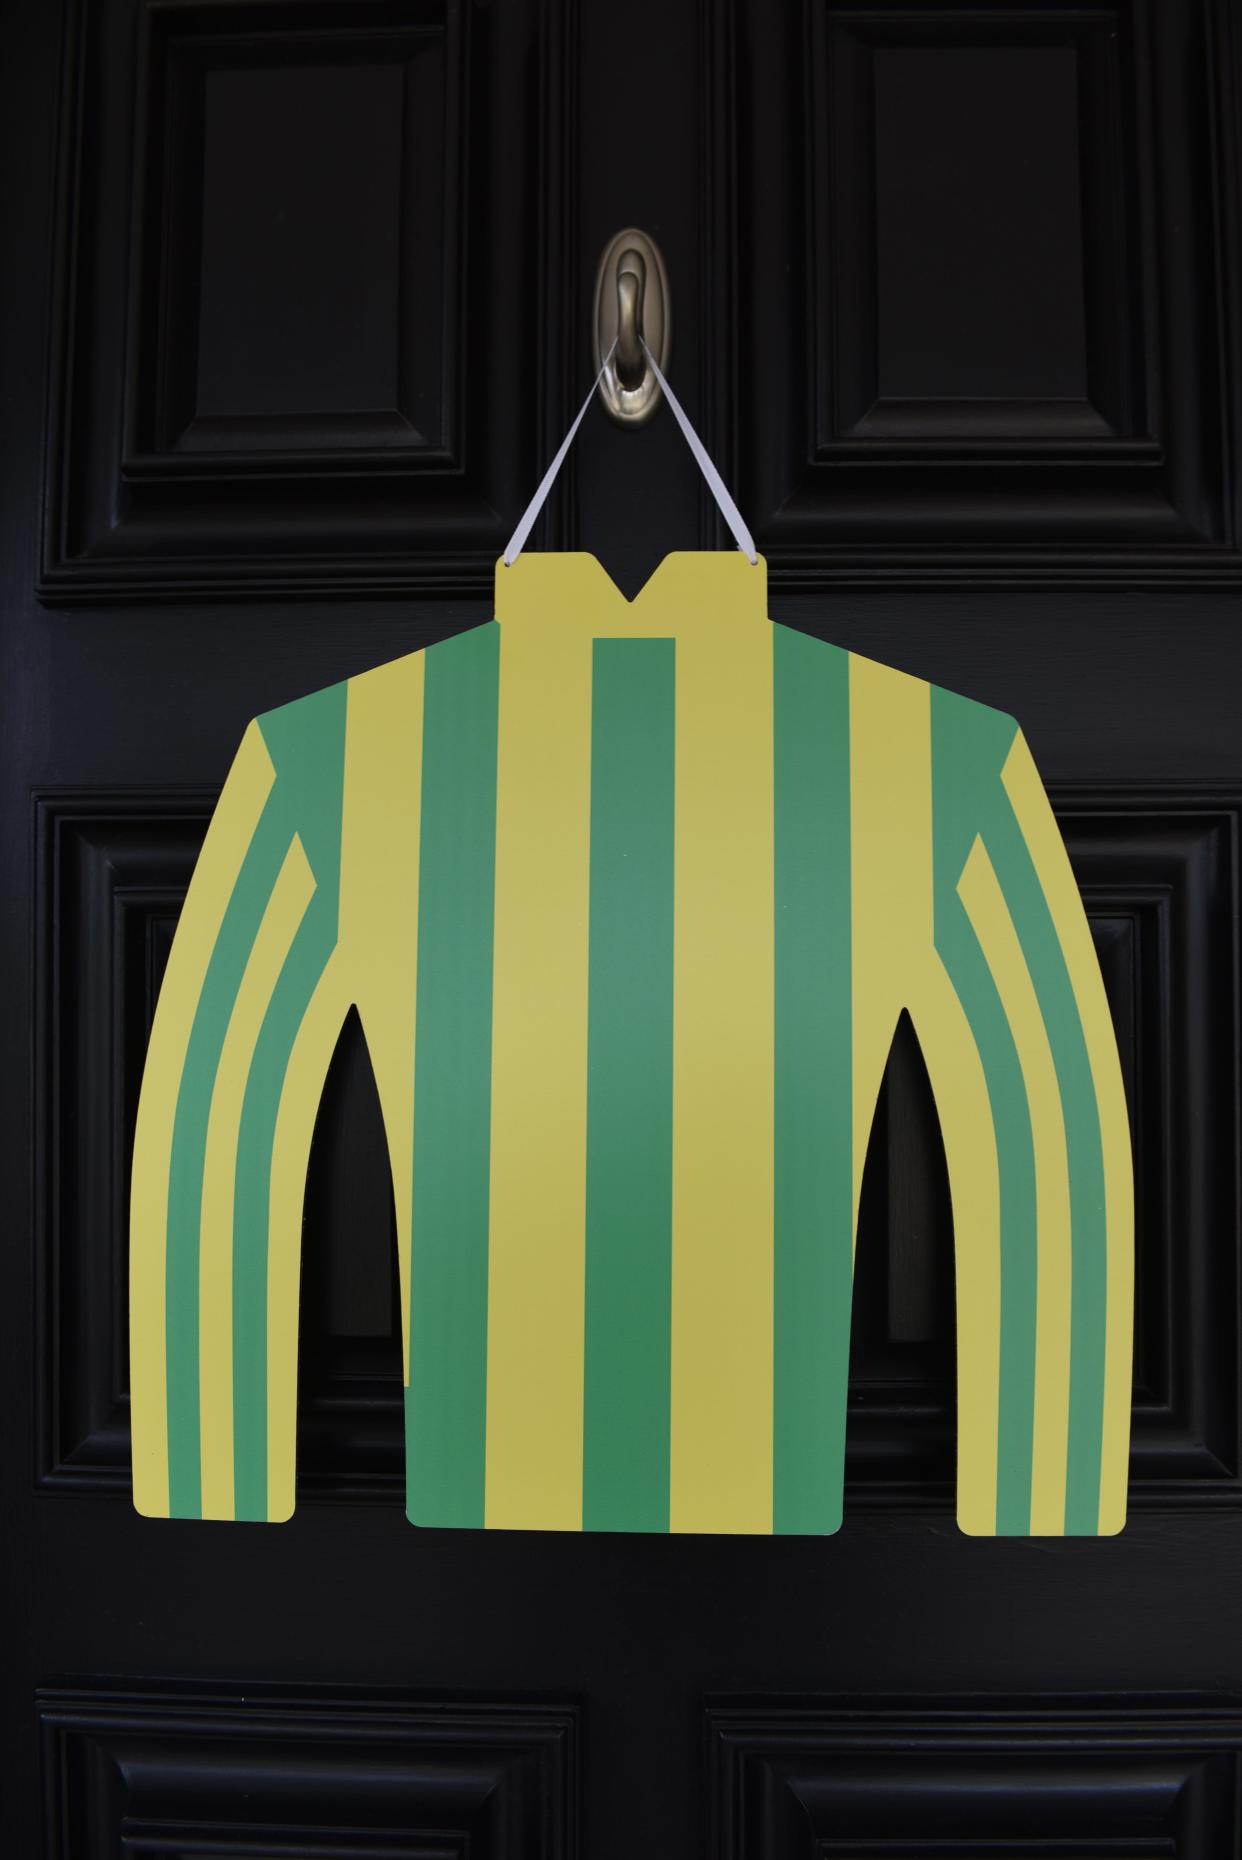 Welcome your Kentucky Derby Day guests with a decoration on your front door.  Bright and colorful jockey silks make a festive door decoration.